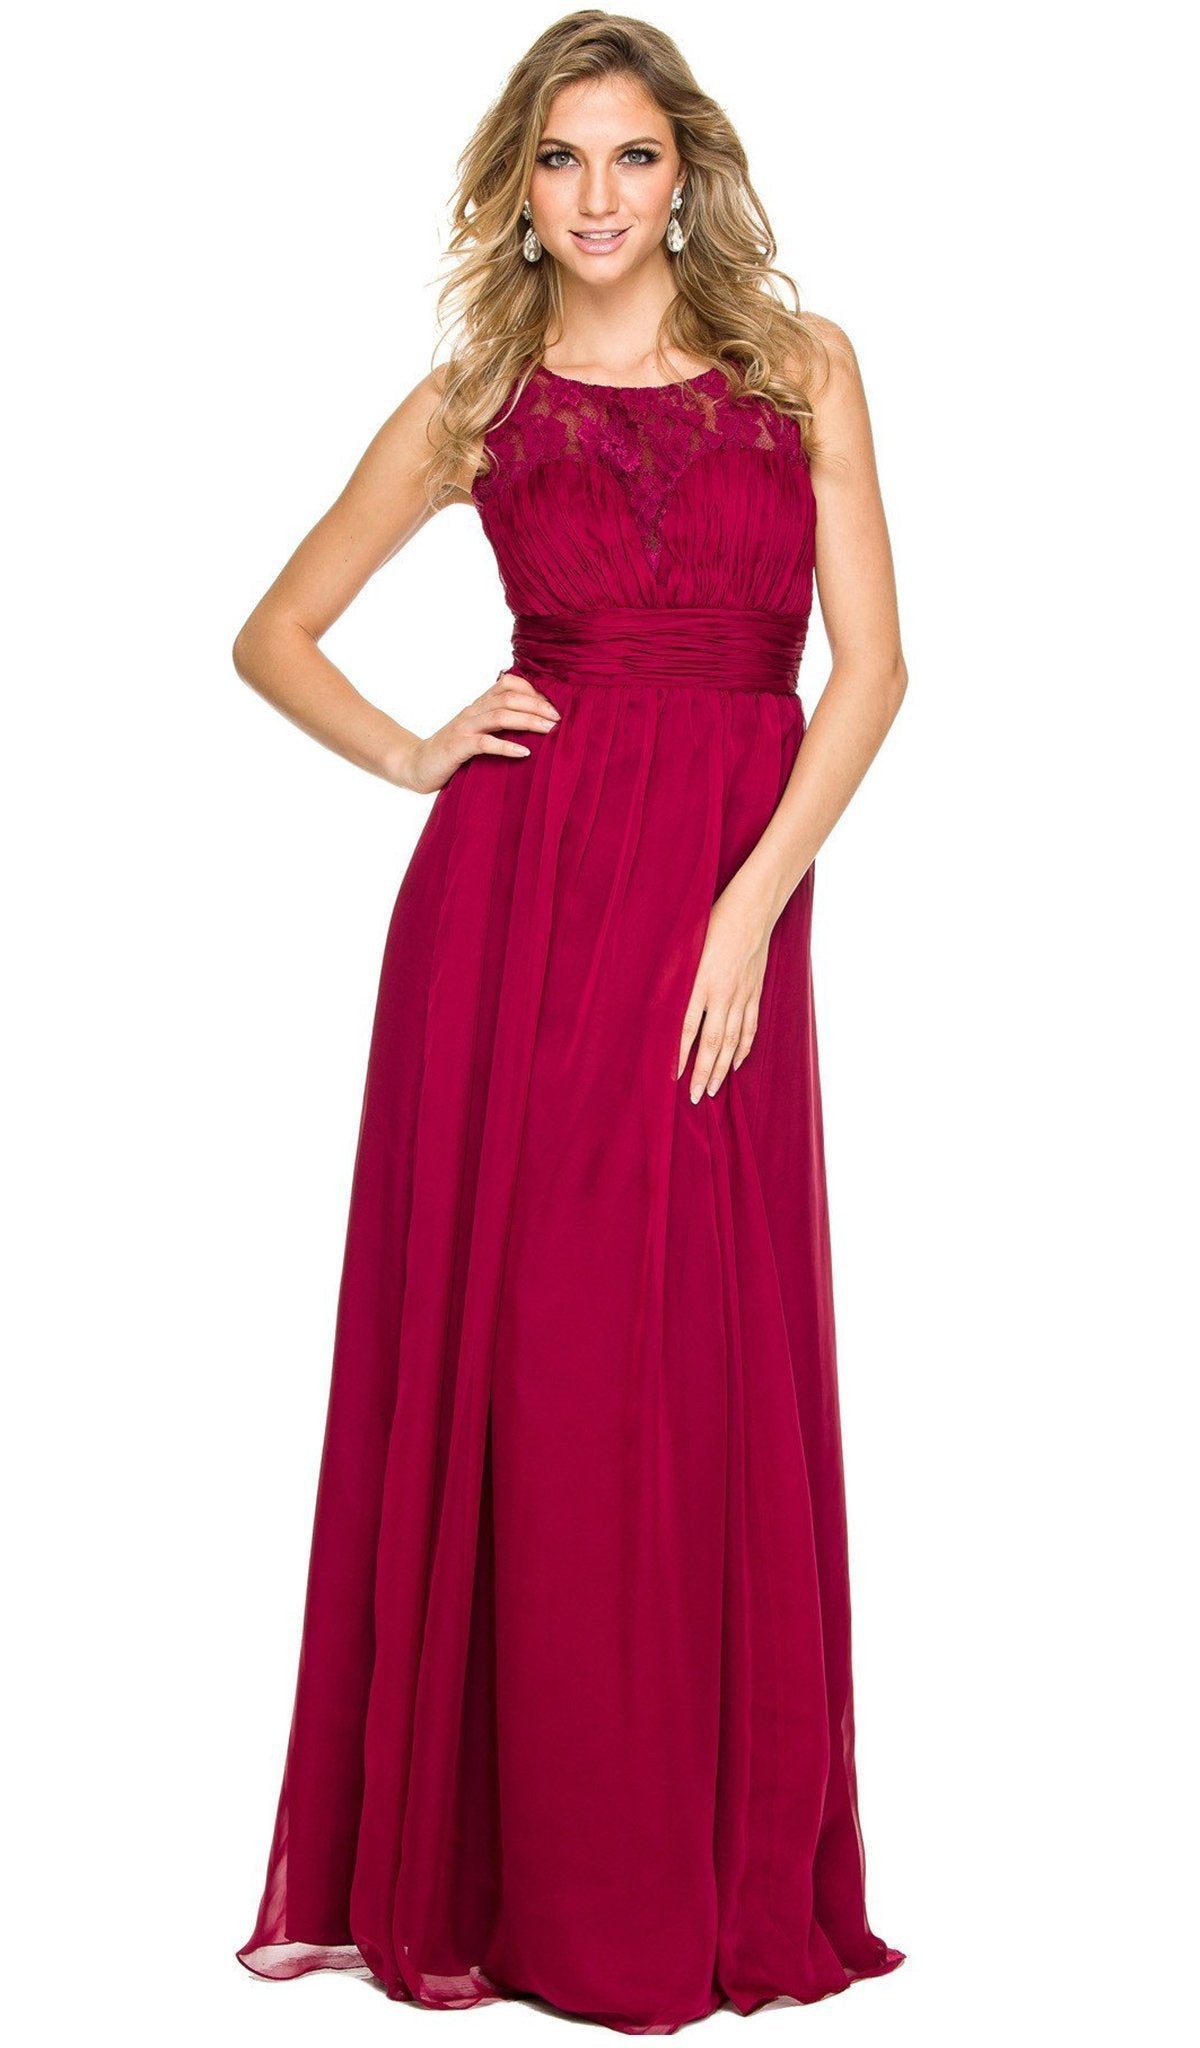 Nox Anabel - 7126 Sleeveless Lace and Chiffon A-Line Evening Dress Special Occasion Dress XS / Burgundy